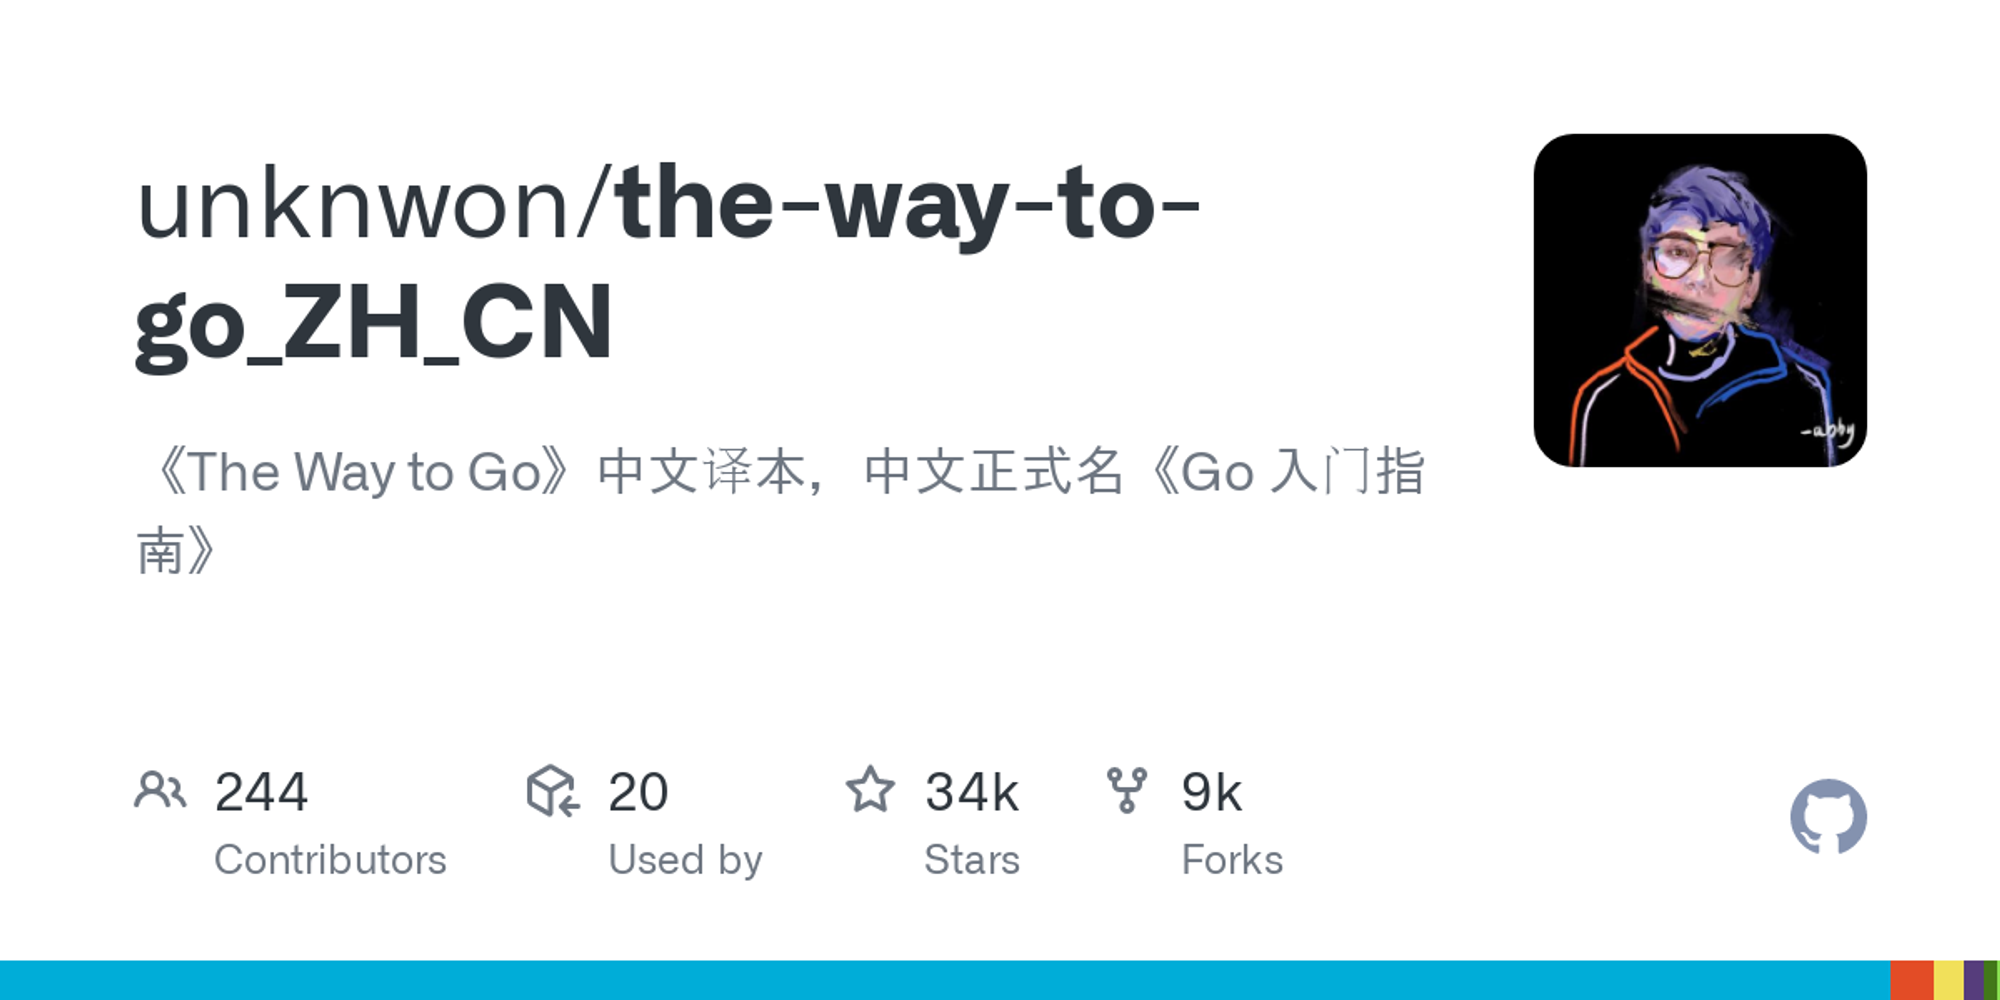 GitHub - unknwon/the-way-to-go_ZH_CN: 《The Way to Go》中文译本，中文正式名《Go 入门指南》